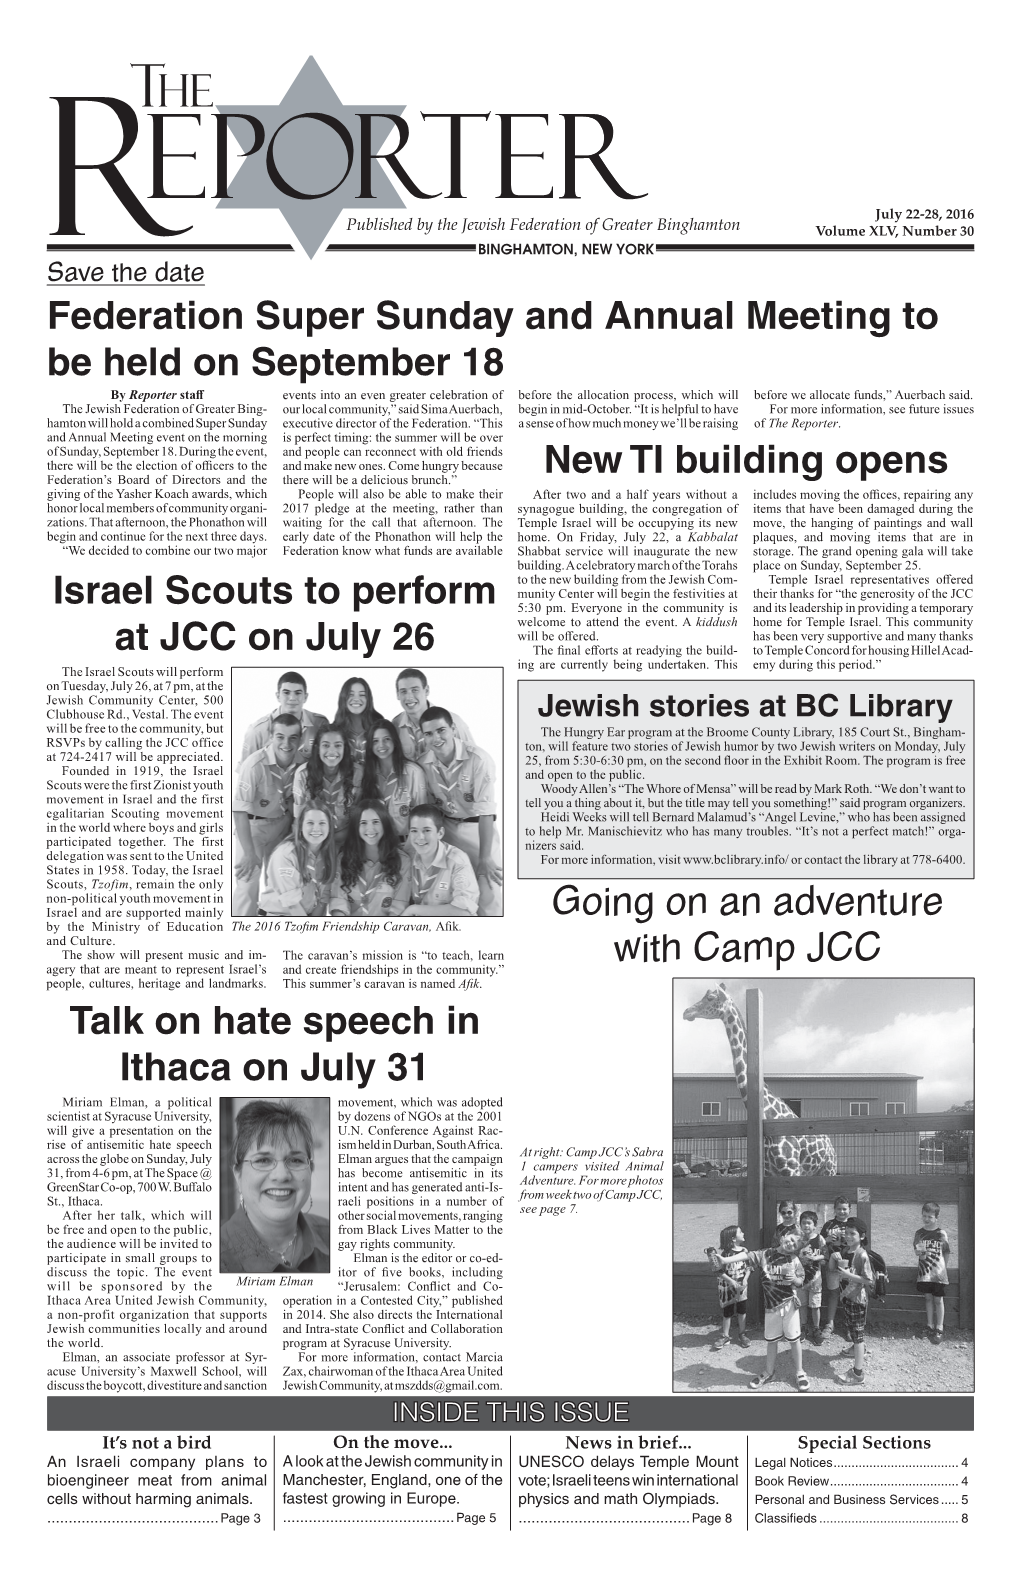 Going on an Adventure with Camp JCC New TI Building Opens Talk On